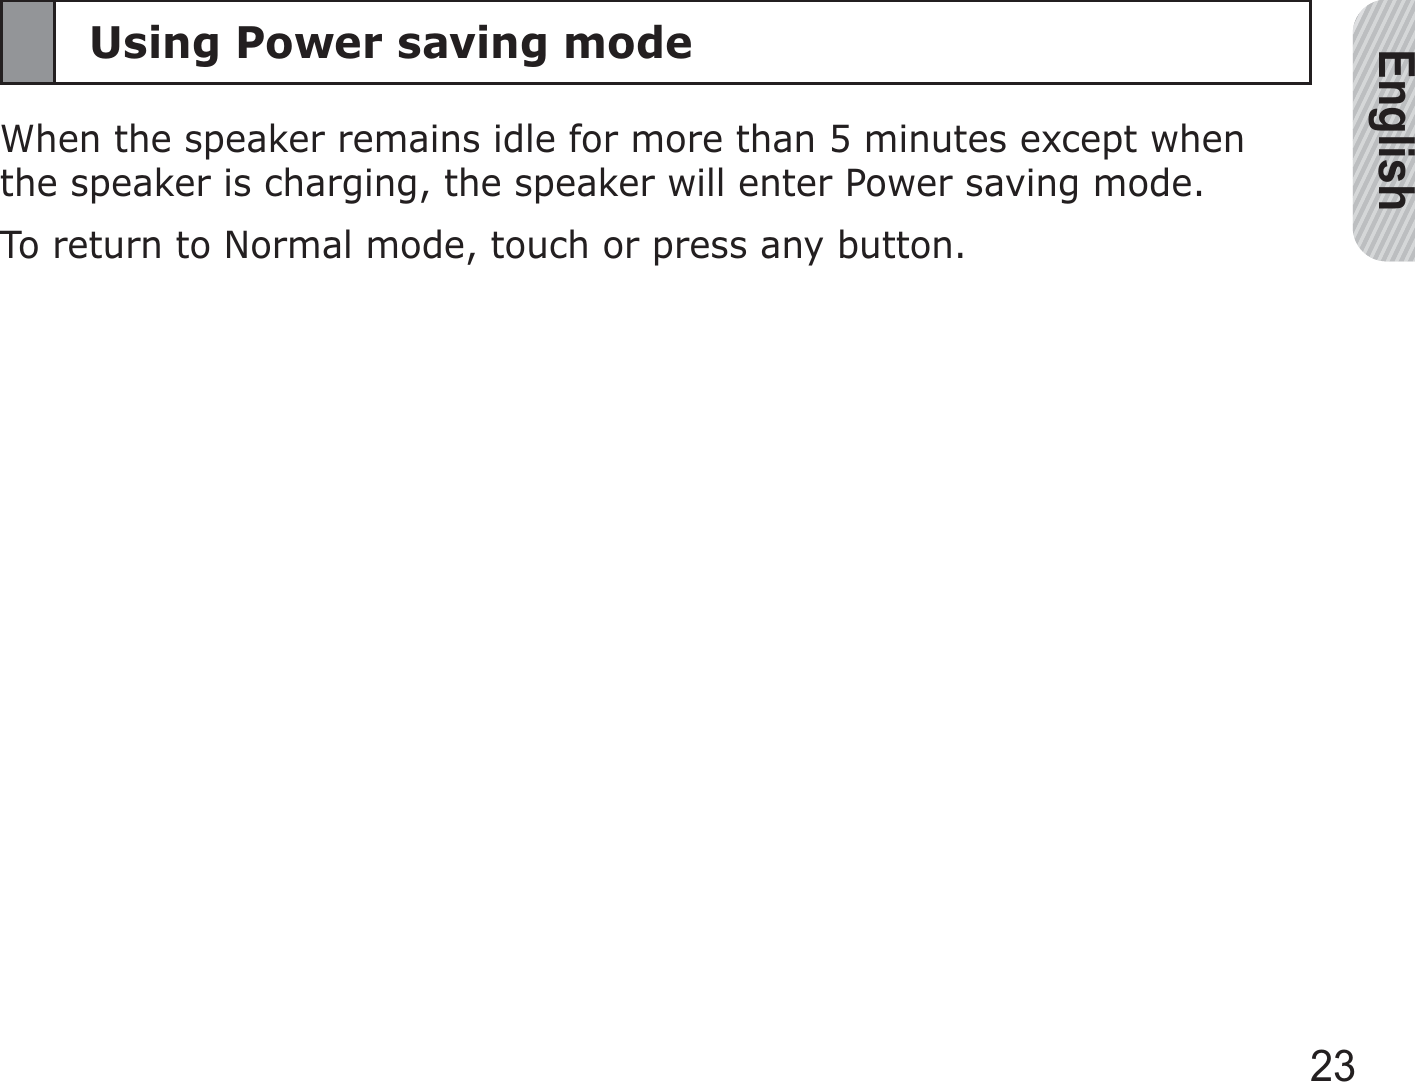 English23Using Power saving modeWhen the speaker remains idle for more than 5 minutes except when the speaker is charging, the speaker will enter Power saving mode. To return to Normal mode, touch or press any button.